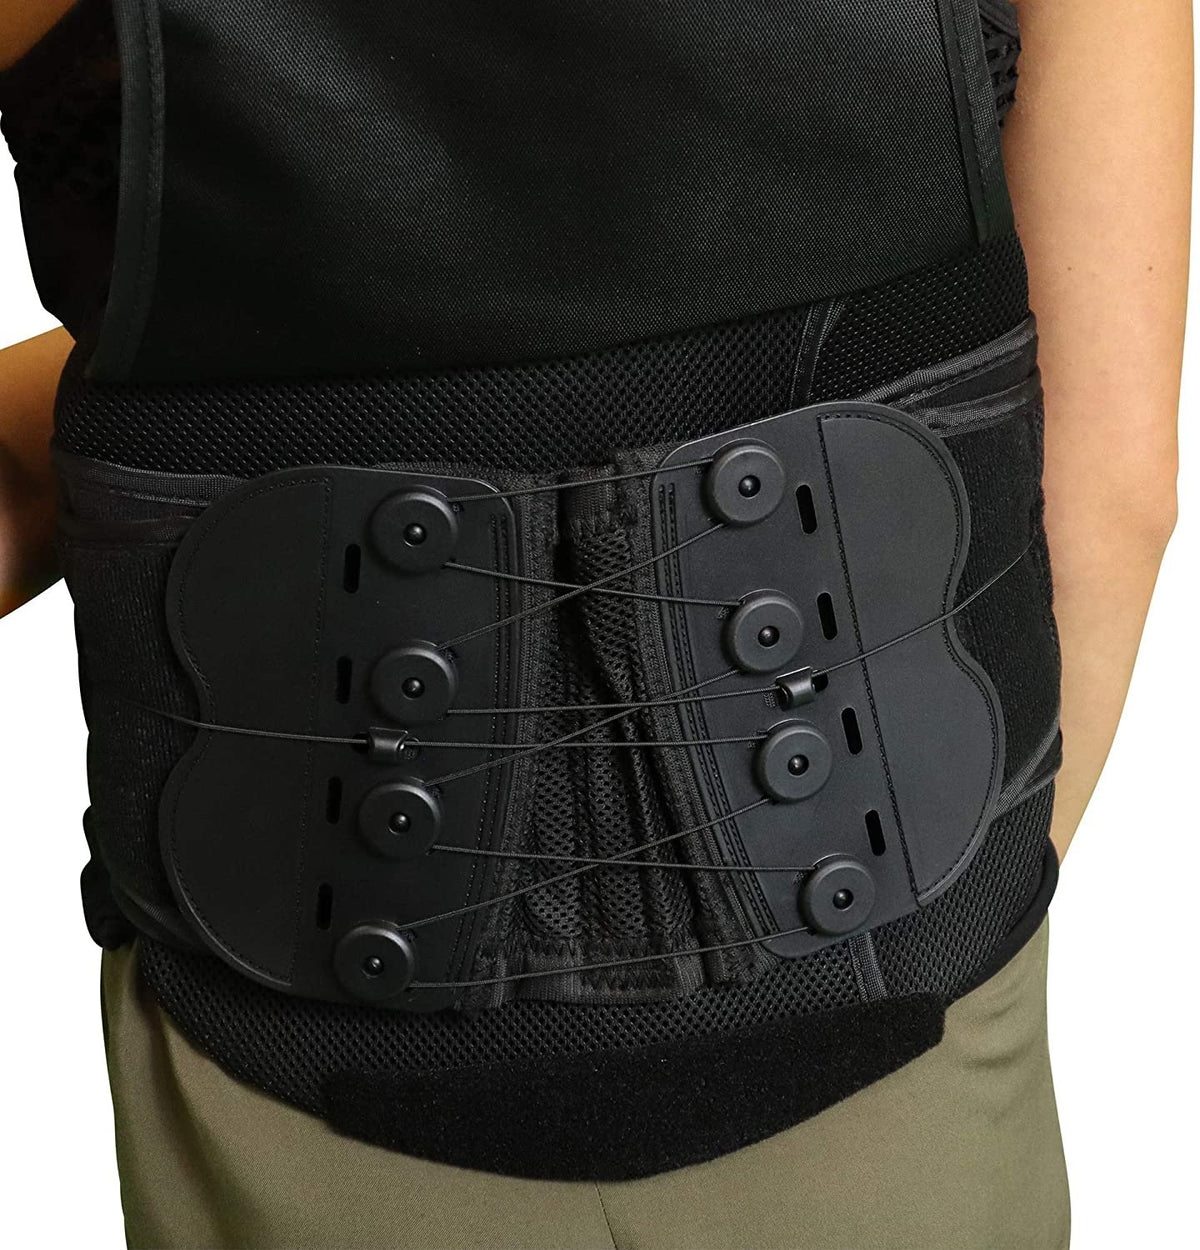 Mars Wellness LSO High Profile Lumbar Lower Back Brace - Universal PDAC L0631/L0648 - Pain Relieving Lumbosacral Brace - Support for Back Pain, Sciatic Spine Stenosis - Mars Med Supply